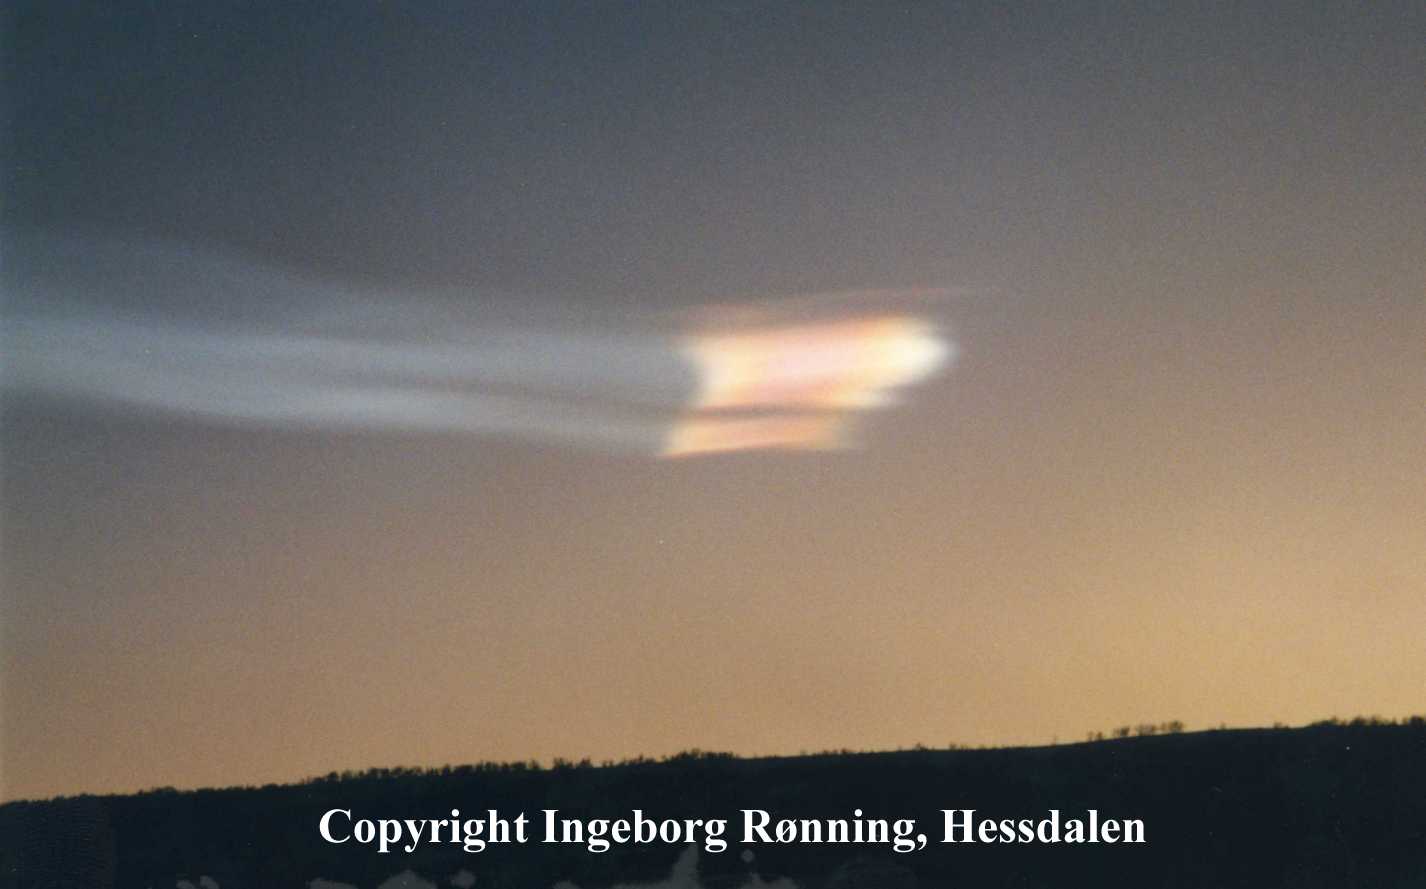 Picture no.4 of a cloud in Hessdalen (big verson)